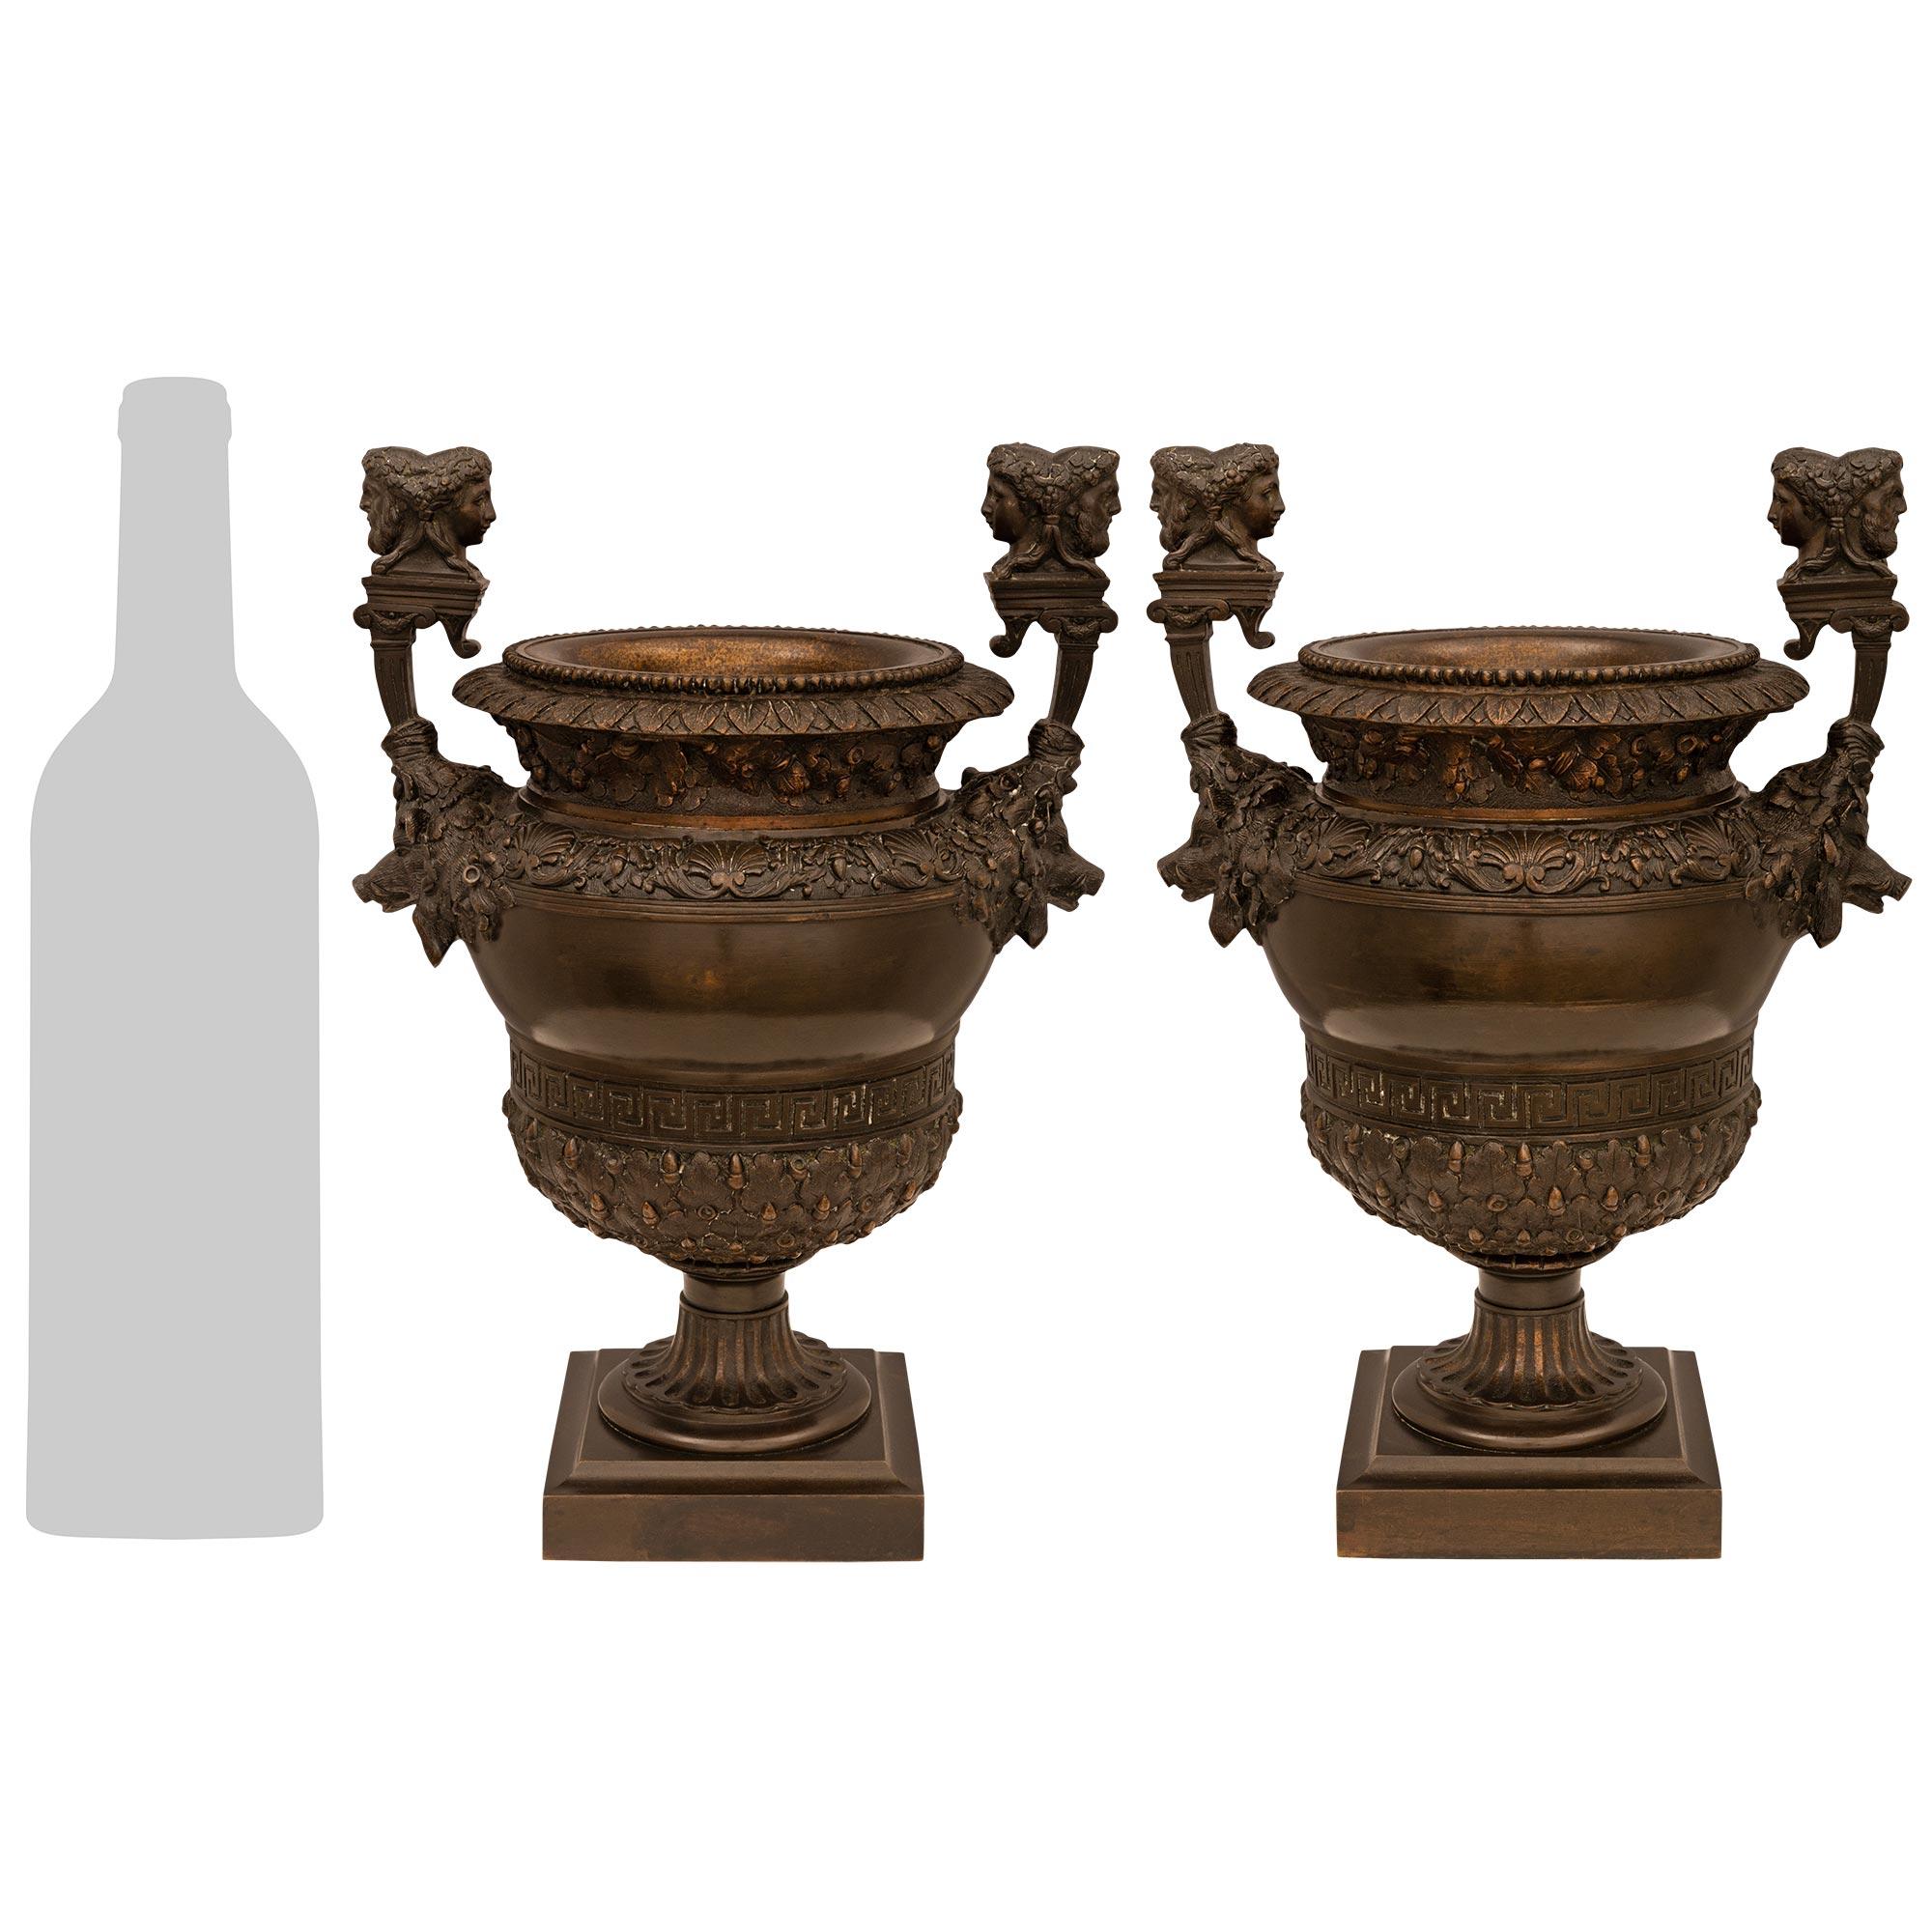 A handsome and most decorative pair of French 19th century Renaissance st. patinated Bronze urns. The urns are raised by square bases displaying the inscription 